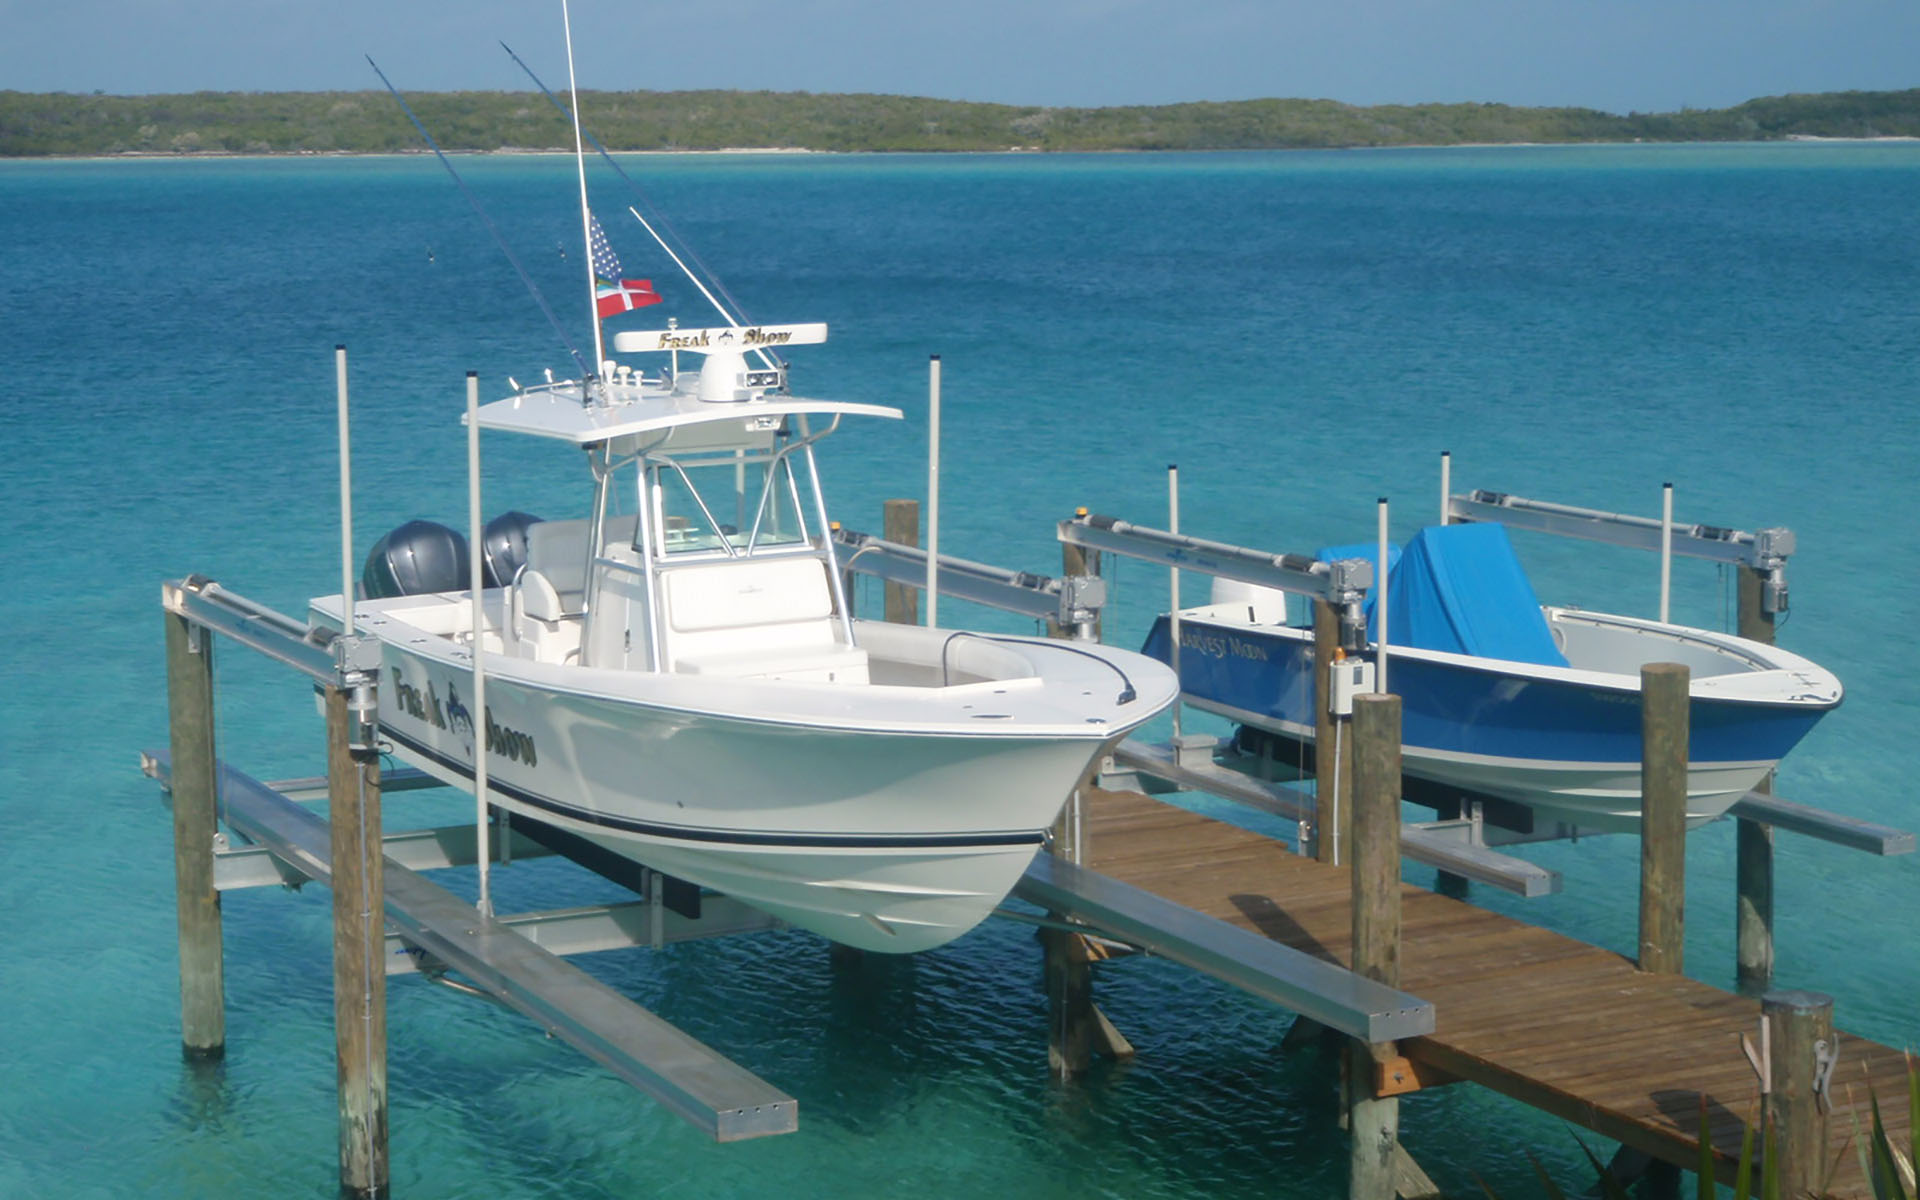 Boat lifts for multiple large luxury boats on the ocean